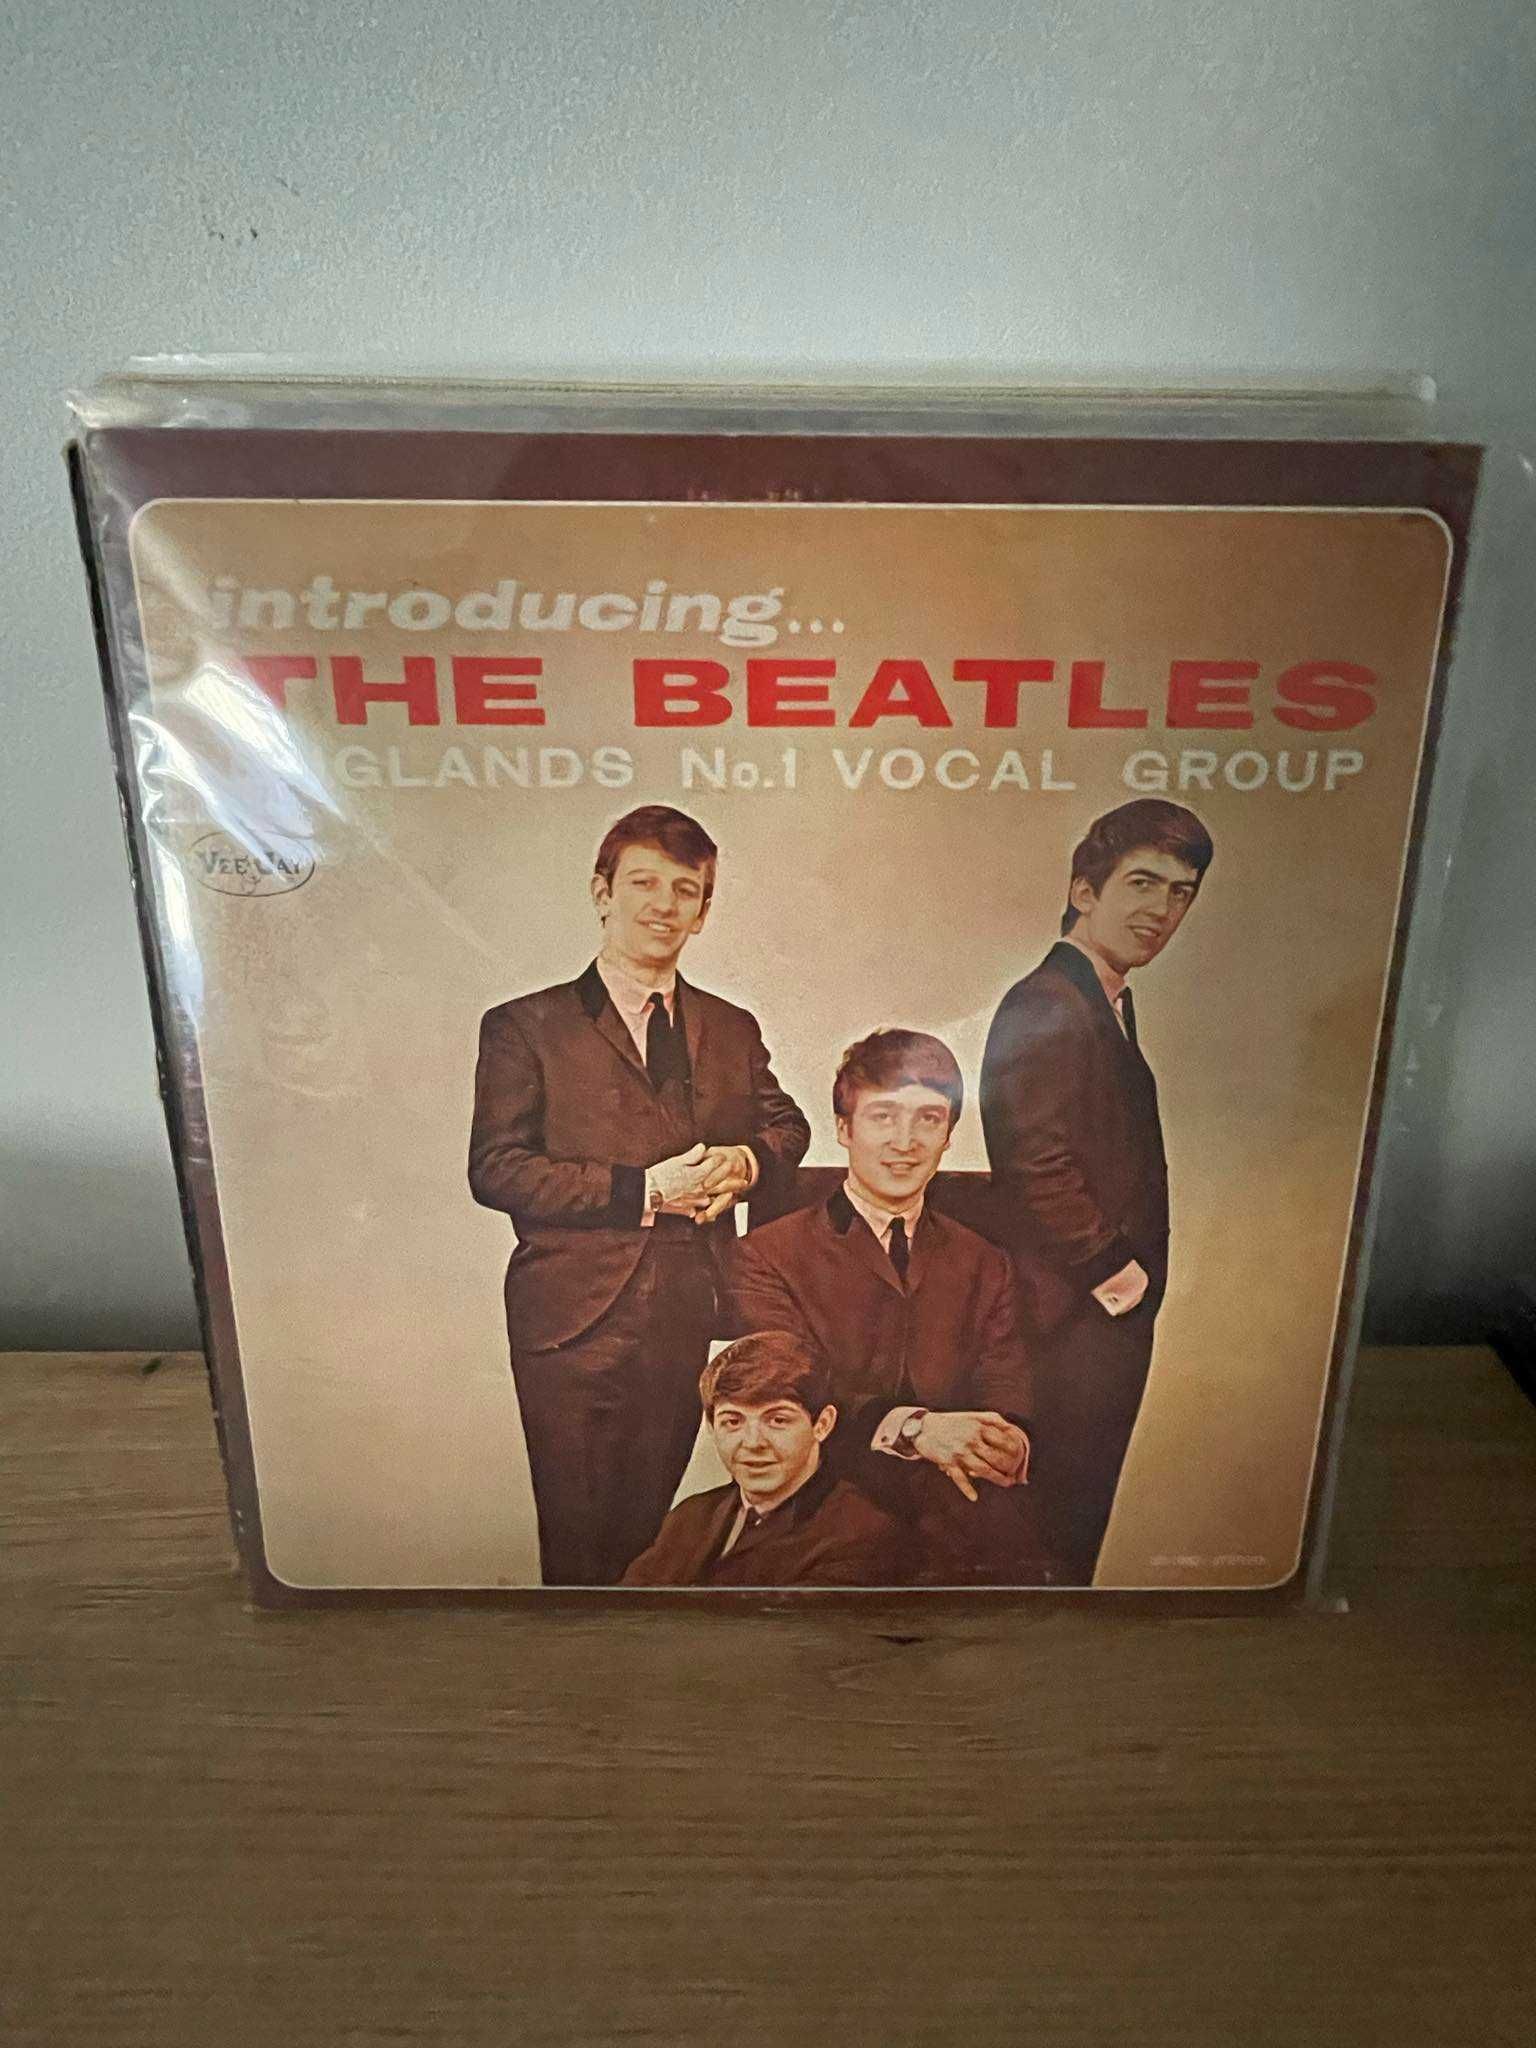 The Beatles – Introducing... The Beatles